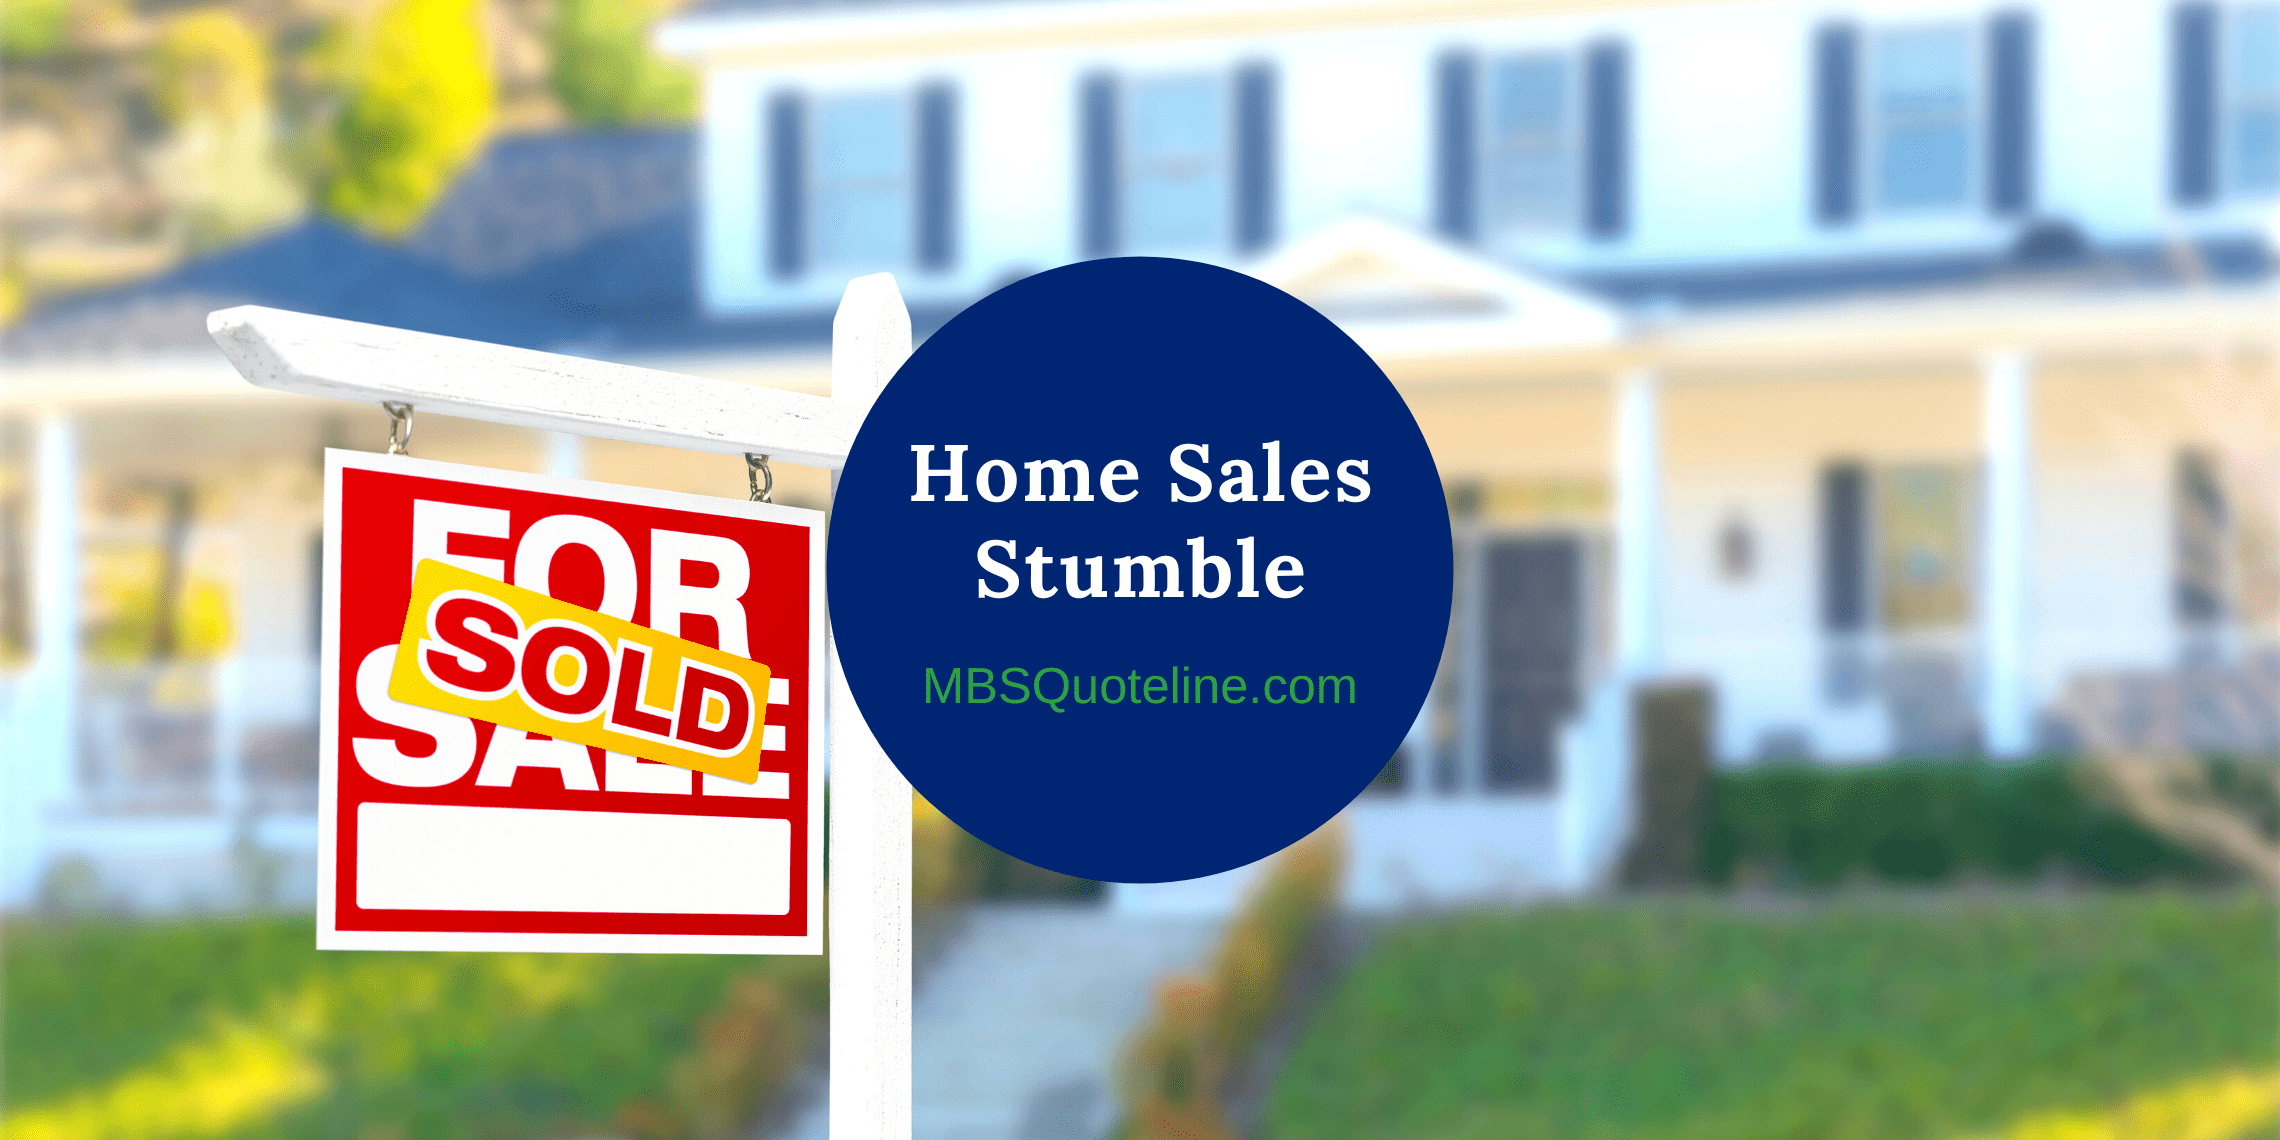 home sales stumble mortgagetime mbsquoteline featured